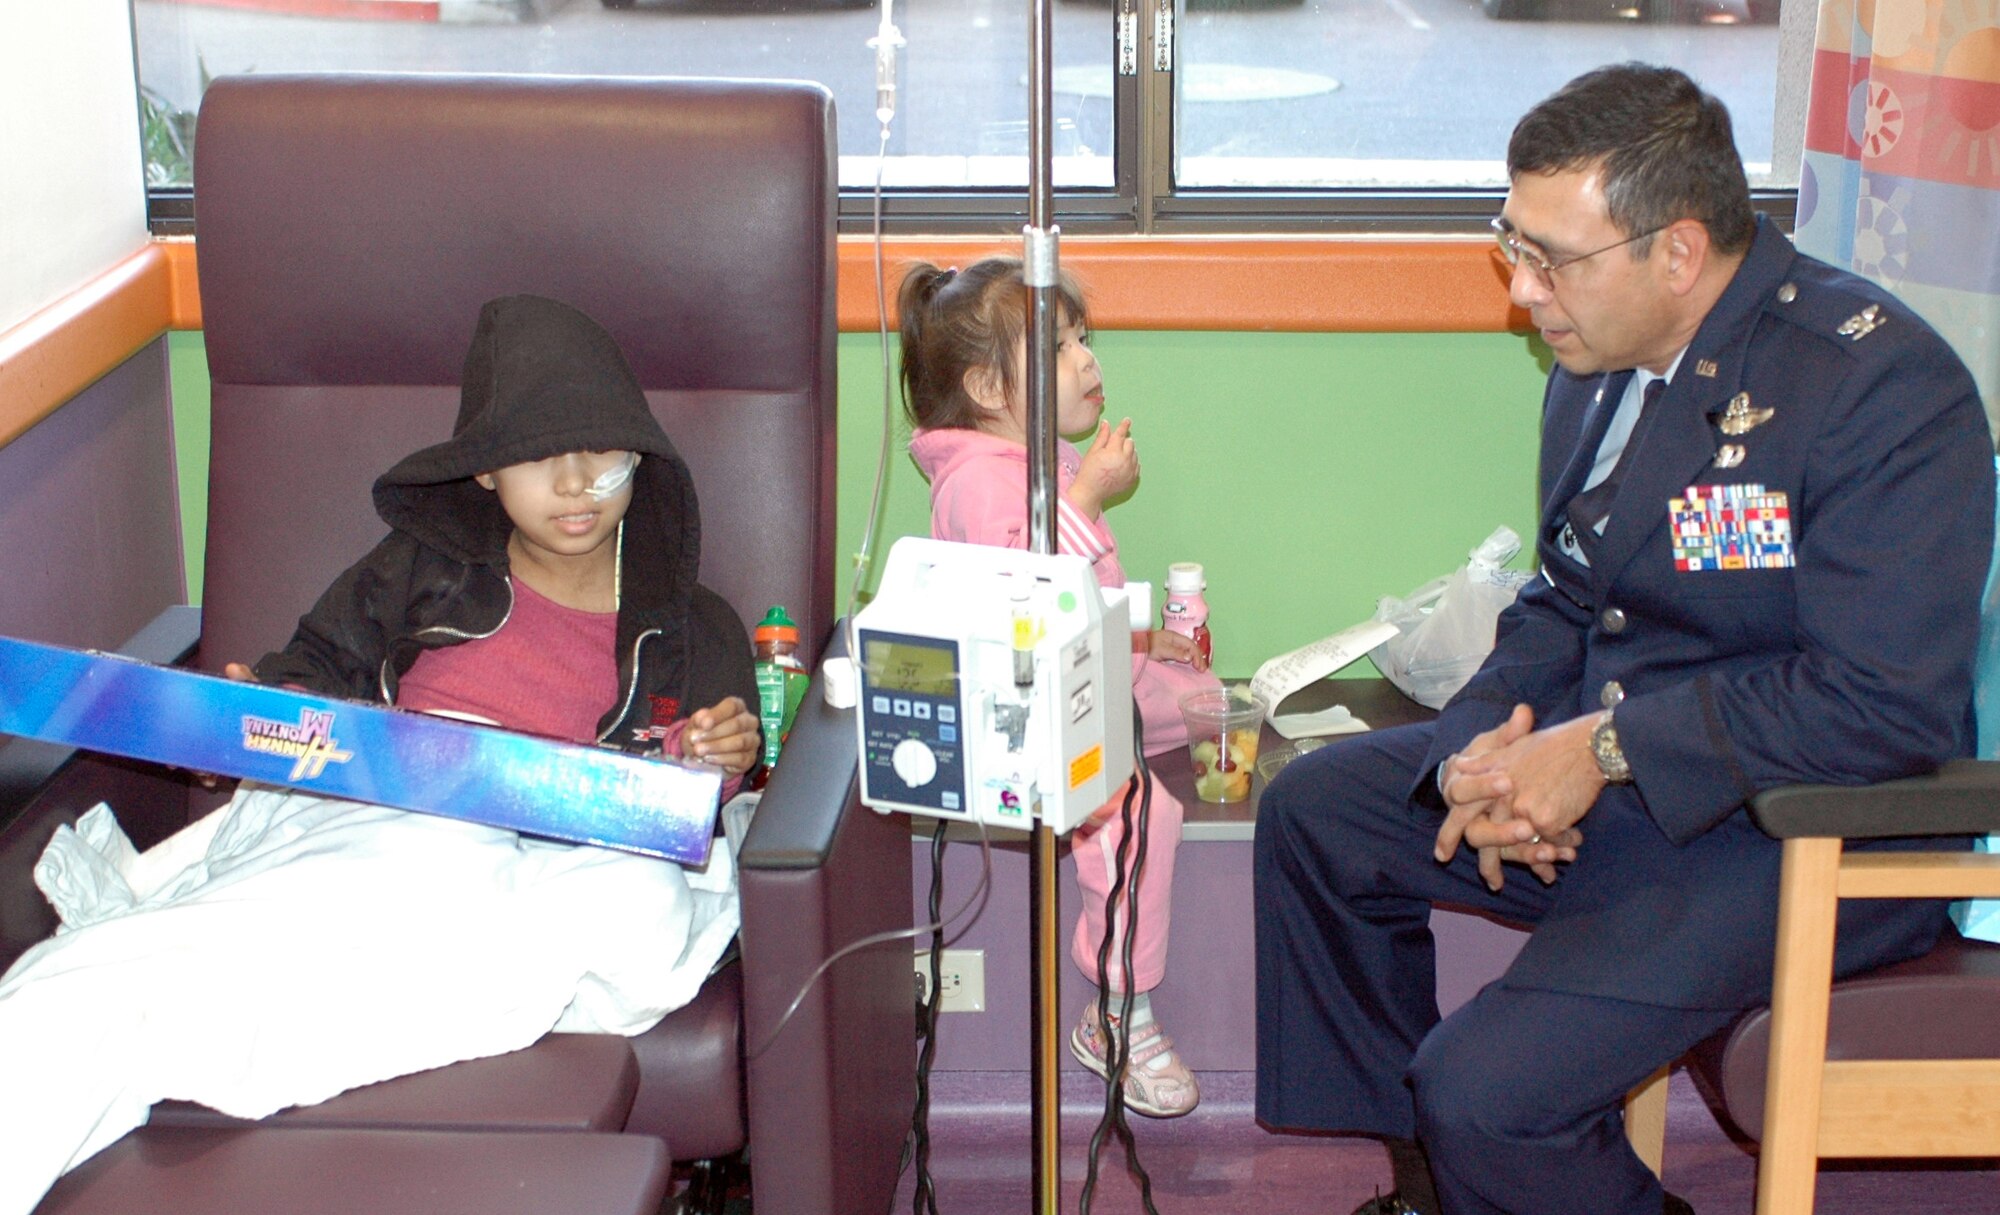 PHOENIX – Col. Jose Salinas, 162nd Fighter Wing Vice Commander, visits with Reyna Nebila, a young patient at Phoenix Children’s Hospital Dec. 11. The colonel and a handful of Arizona Air National Guardsmen made the trip to Phoenix to deliver toys, games, books and DVDs to the children. Reyna wanted anything to do with “Hanna Montana” and received a toy guitar themed after the hit TV series. (Air National Guard photo by Capt. Gabe Johnson)
